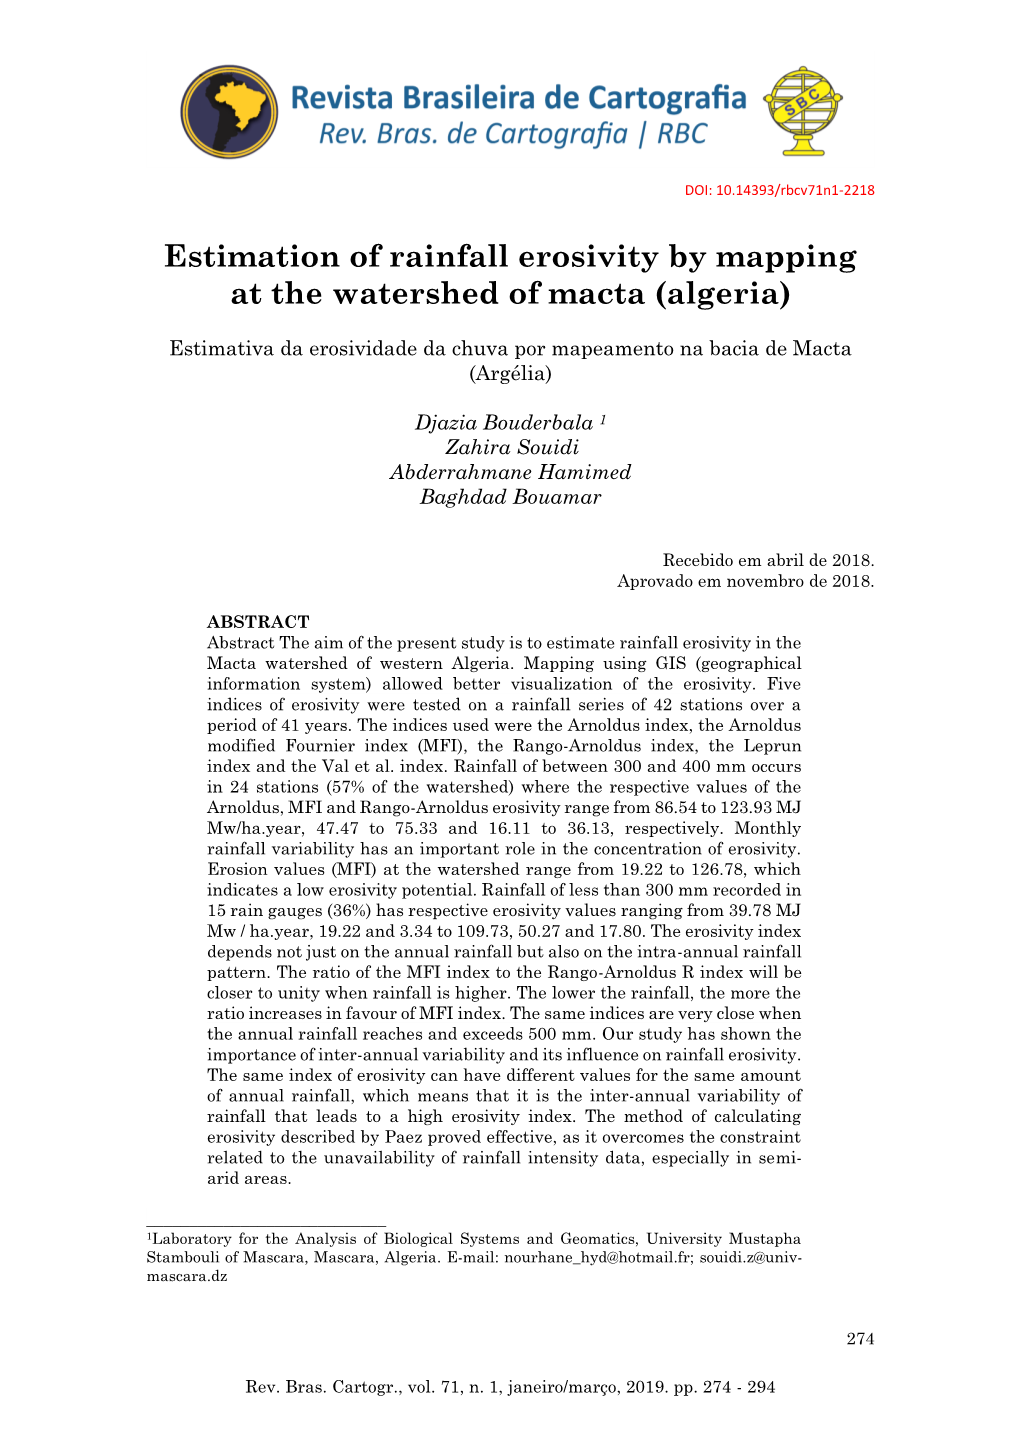 Estimation of Rainfall Erosivity by Mapping at the Watershed of Macta (Algeria)